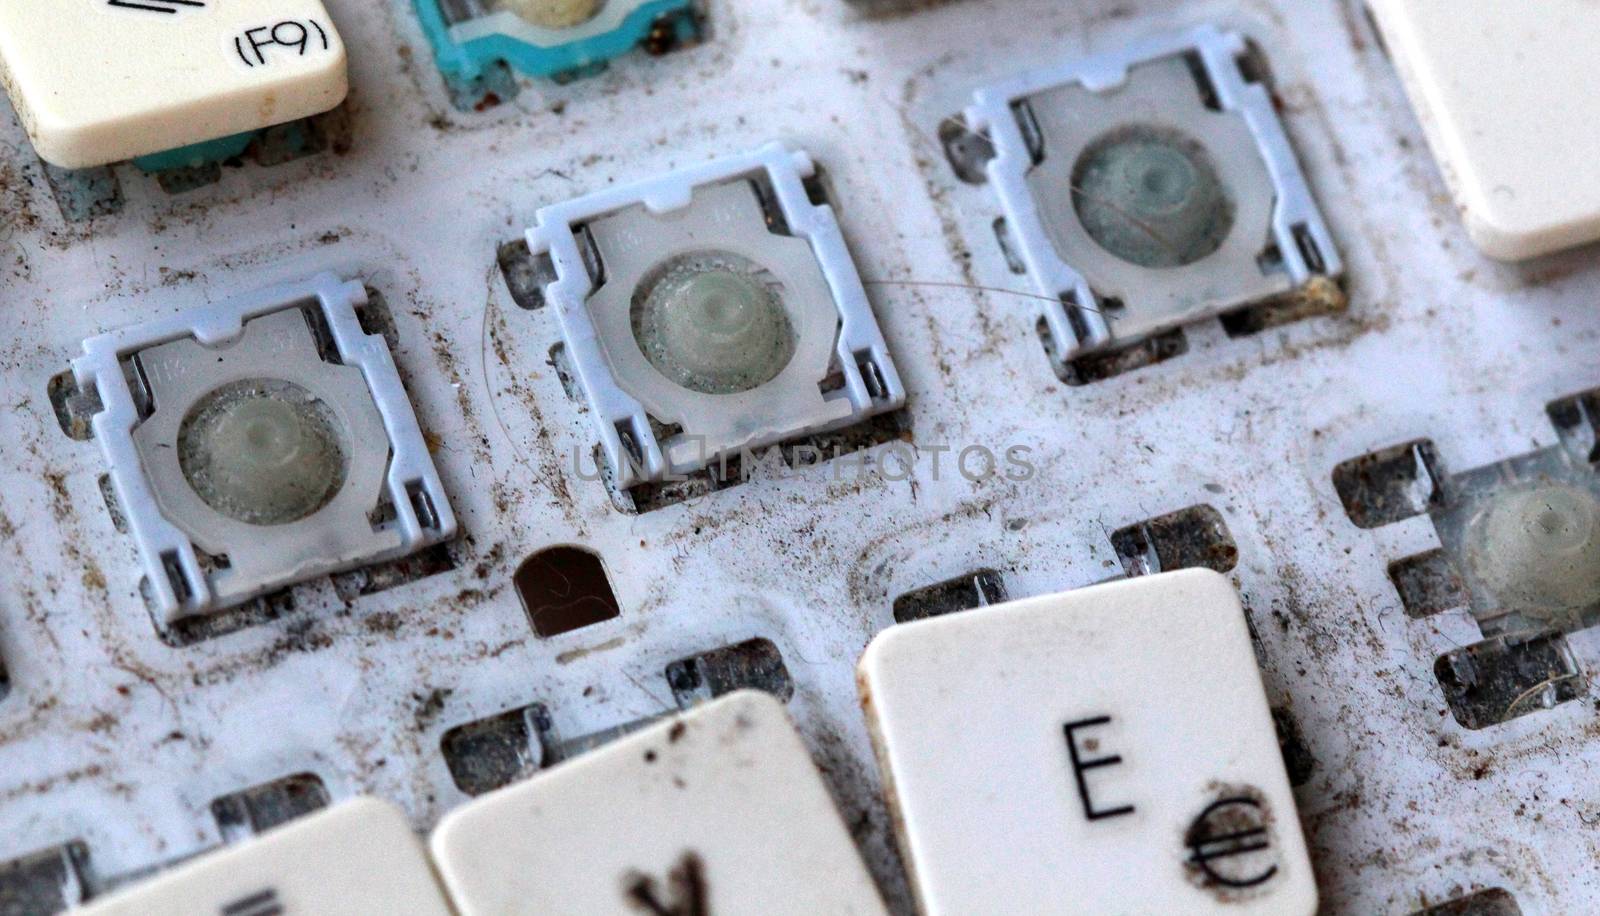 A close view of some keys on a dirty, yellowed keyboard. by nehru